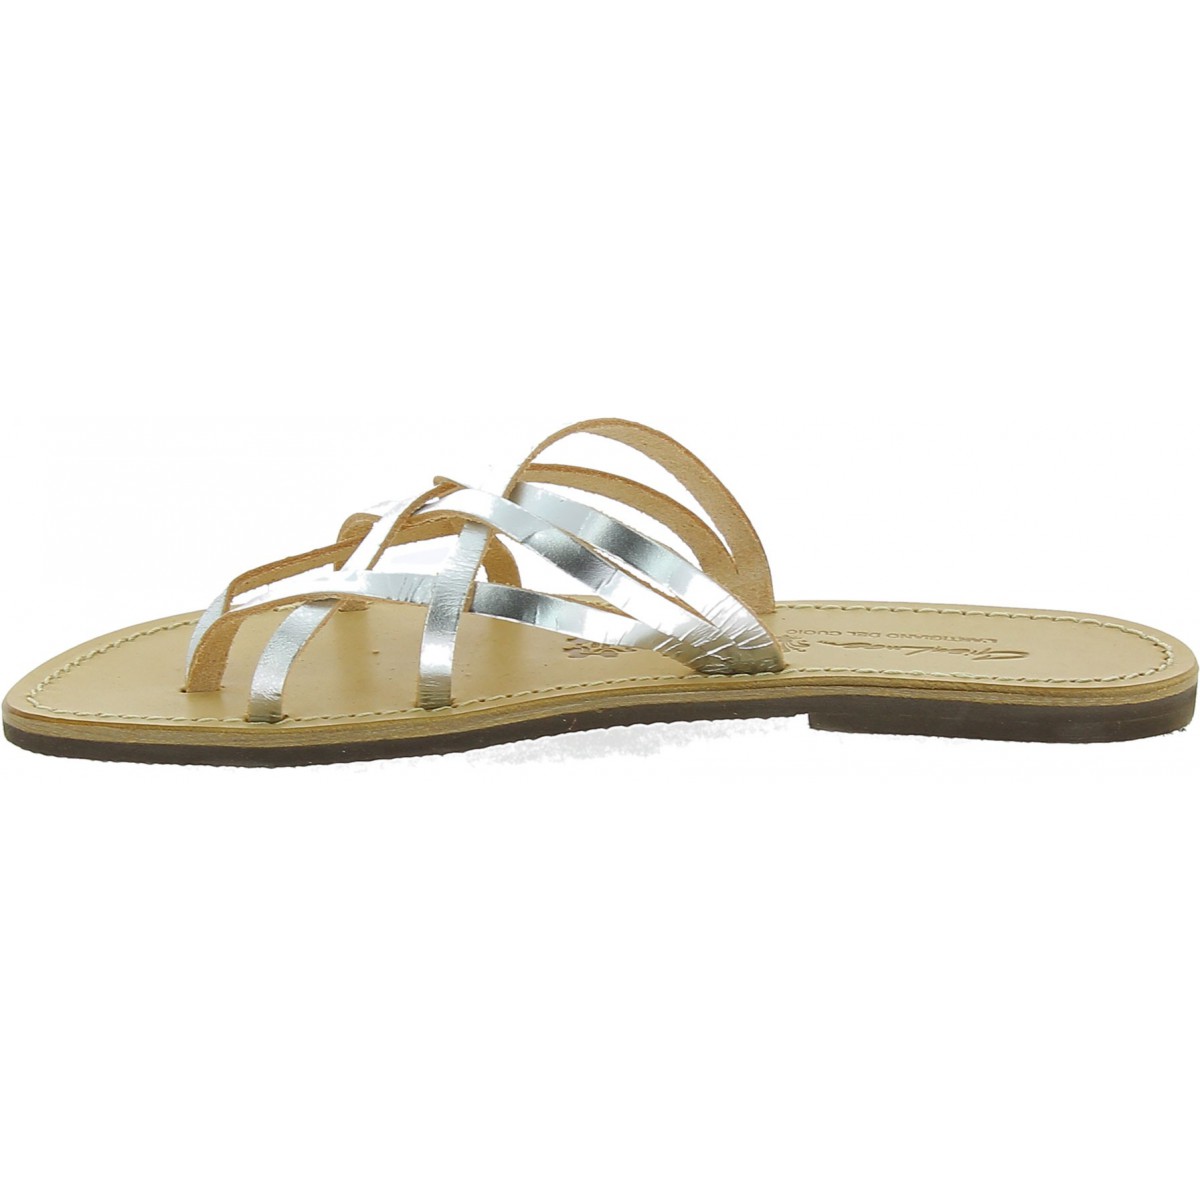 Handmade womens silver flat sandals thongs with leather sole | The ...